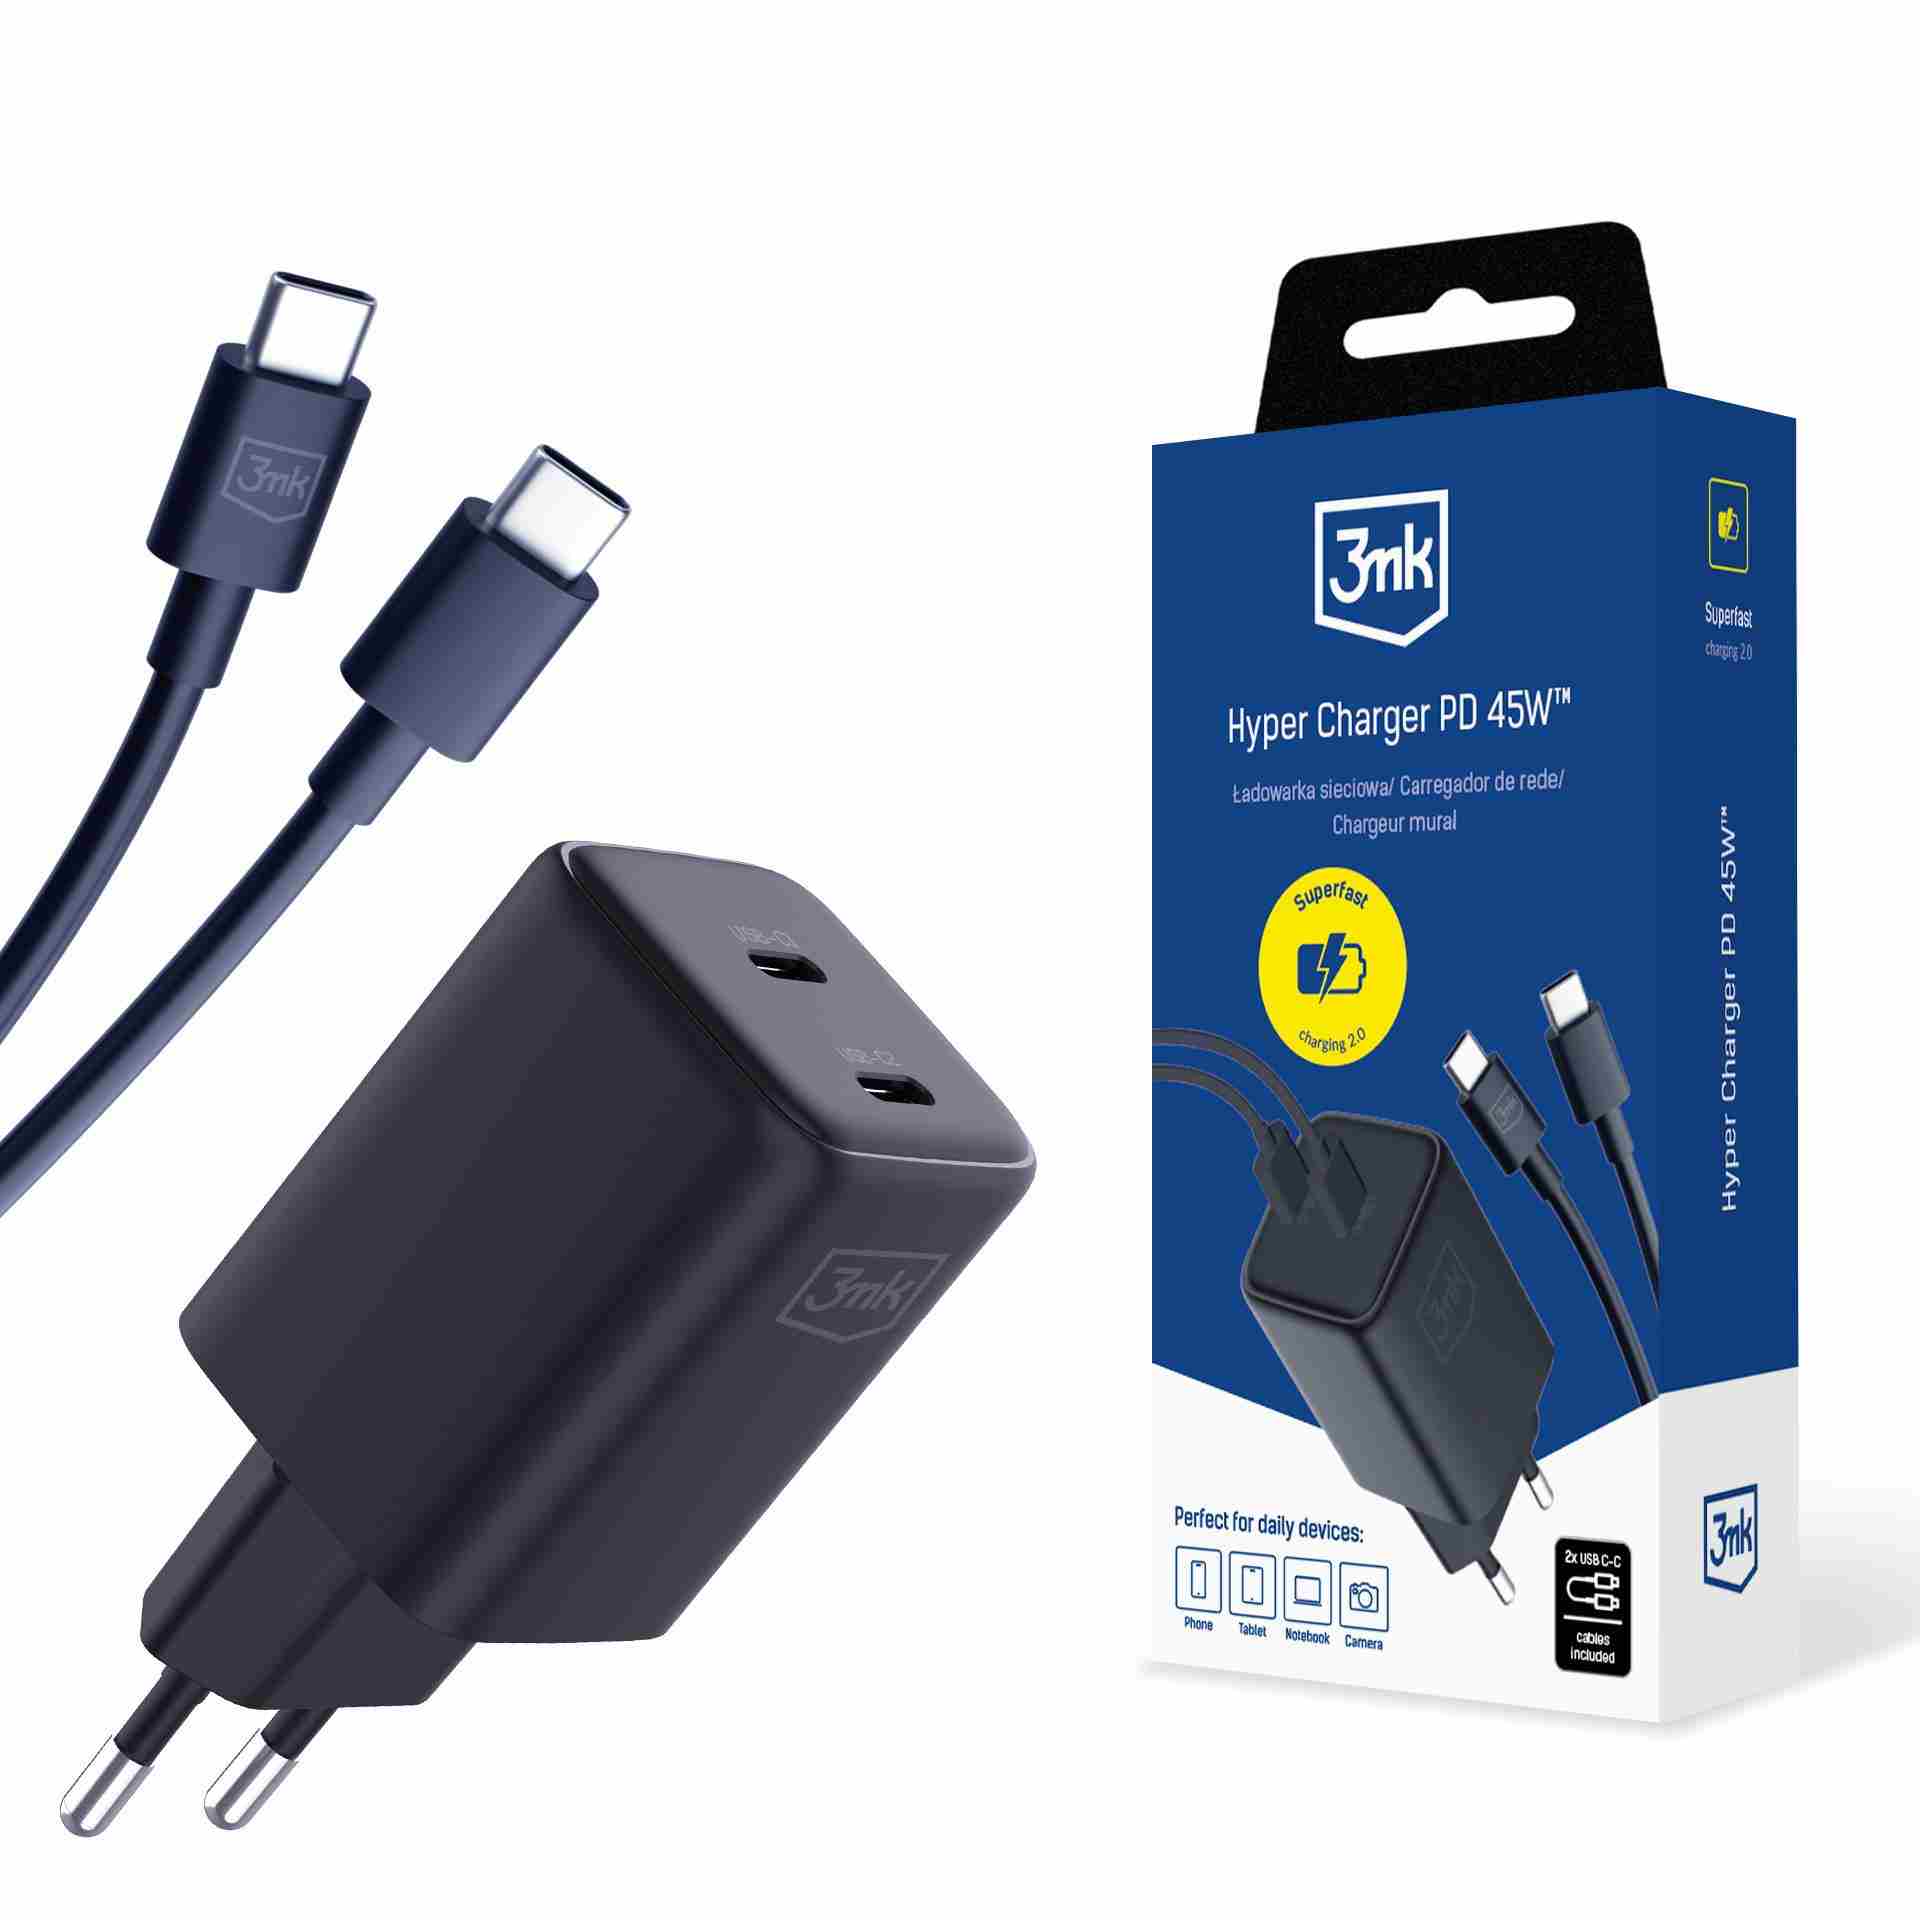 3mk Hyper Charger PD 45W+USB Cable C to C Black0 